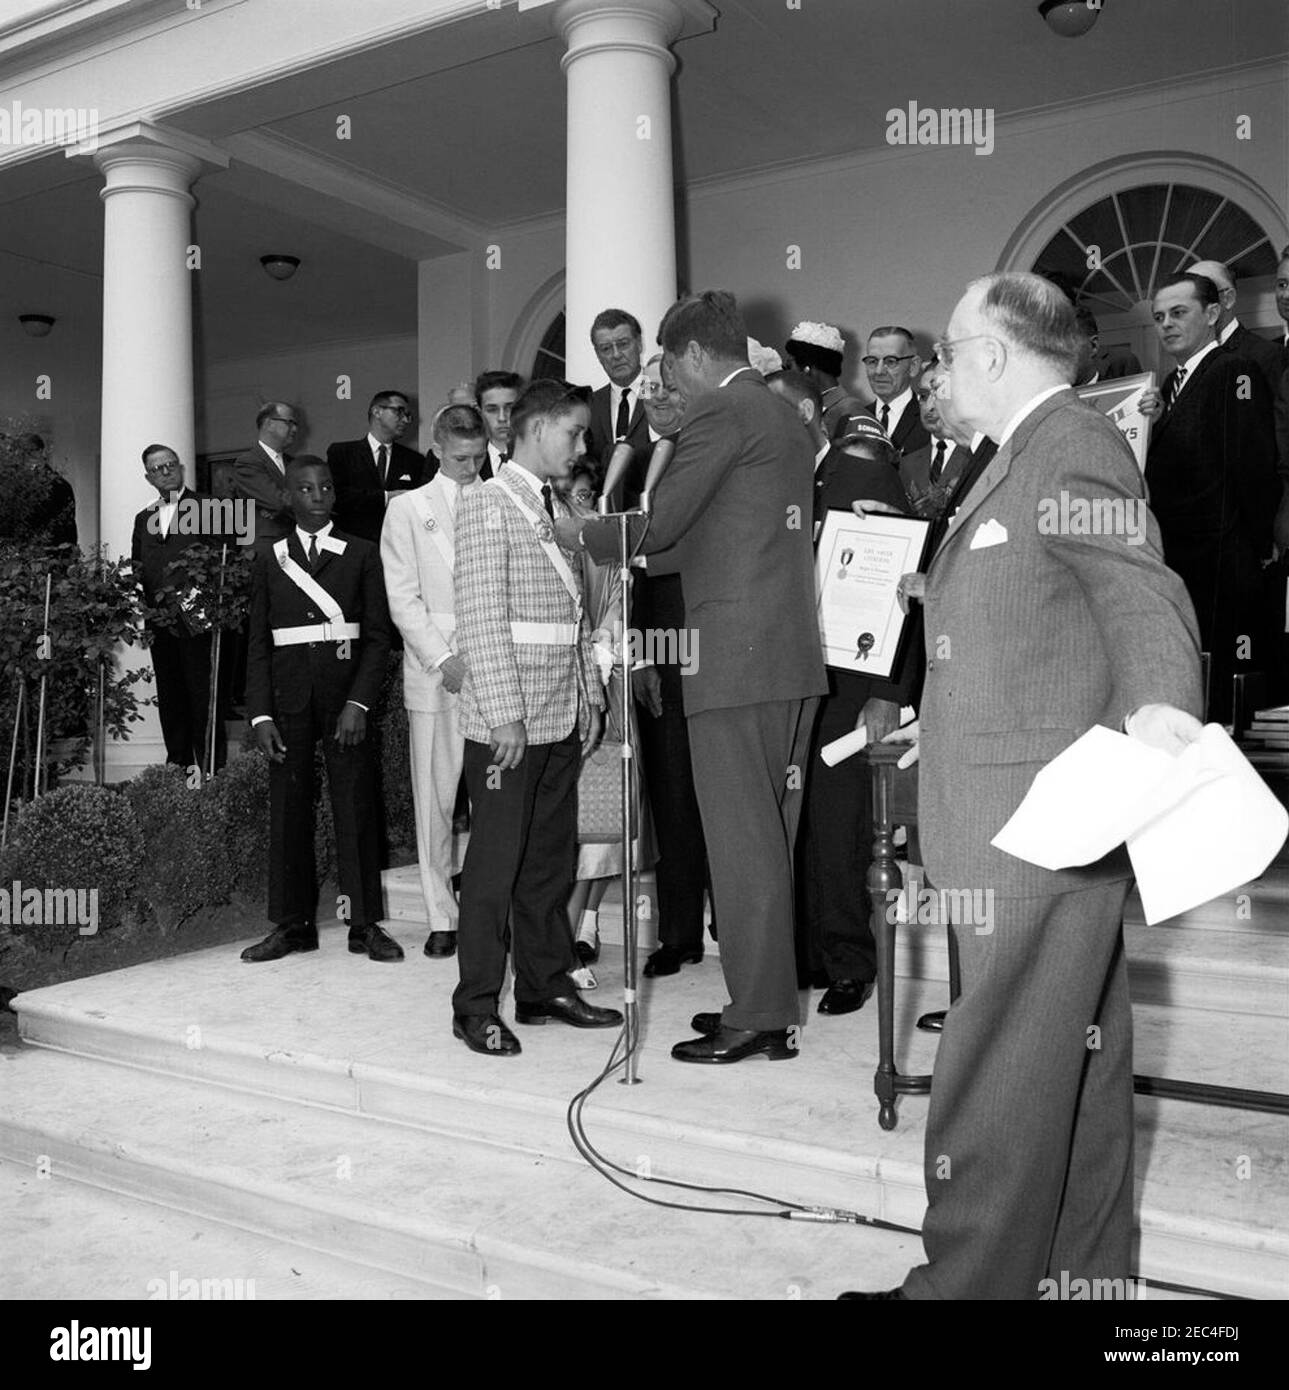 Presentation of the American Automobile Association (AAA) Lifesaving Awards in the Rose Garden, 9:50AM. President John F. Kennedy presents the American Automobile Association (AAA) Lifesaving Award to Ralph S. u201cSteveu201d Brannin (of North Pinellas Park, Florida); four other members of the organizationu2019s School Safety Patrol also received the award. Those pictured include: award recipients Wayne Brown (of New York, New York), Wesley Haines (of Dayton, Ohio), John Puhak (of Hazelton, Pennsylvania), and Patricia Miller (of Hereford, Pennsylvania); Representative Paul F. Schenck (Ohio) Stock Photo